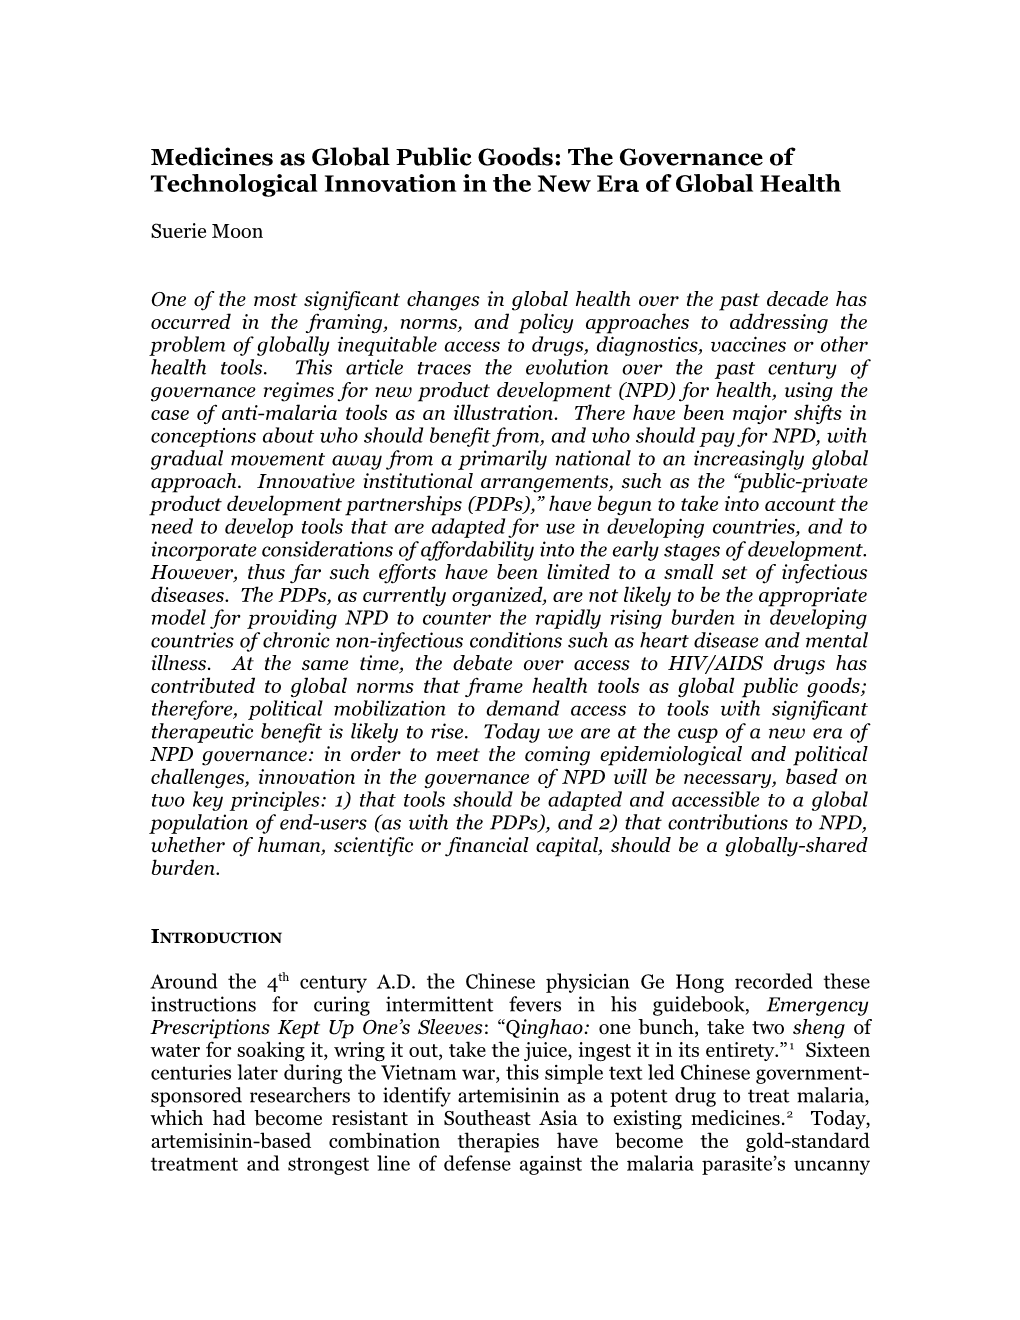 Medicines As Global Public Goods: the Governance of Technological Innovation in the New